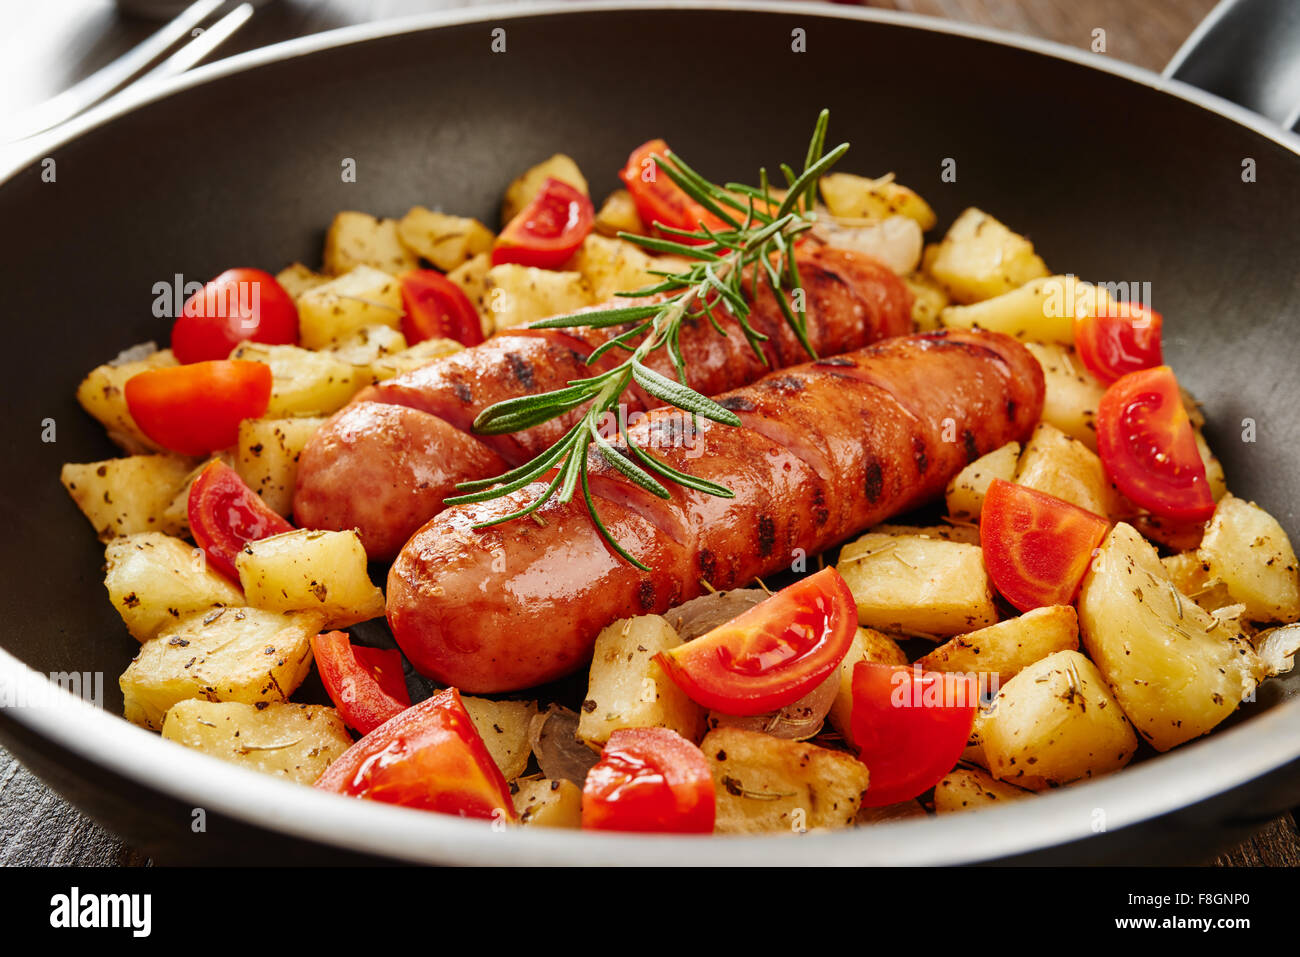 Grilled sausage in pan on wooden table surrounded by ingredients Stock Photo